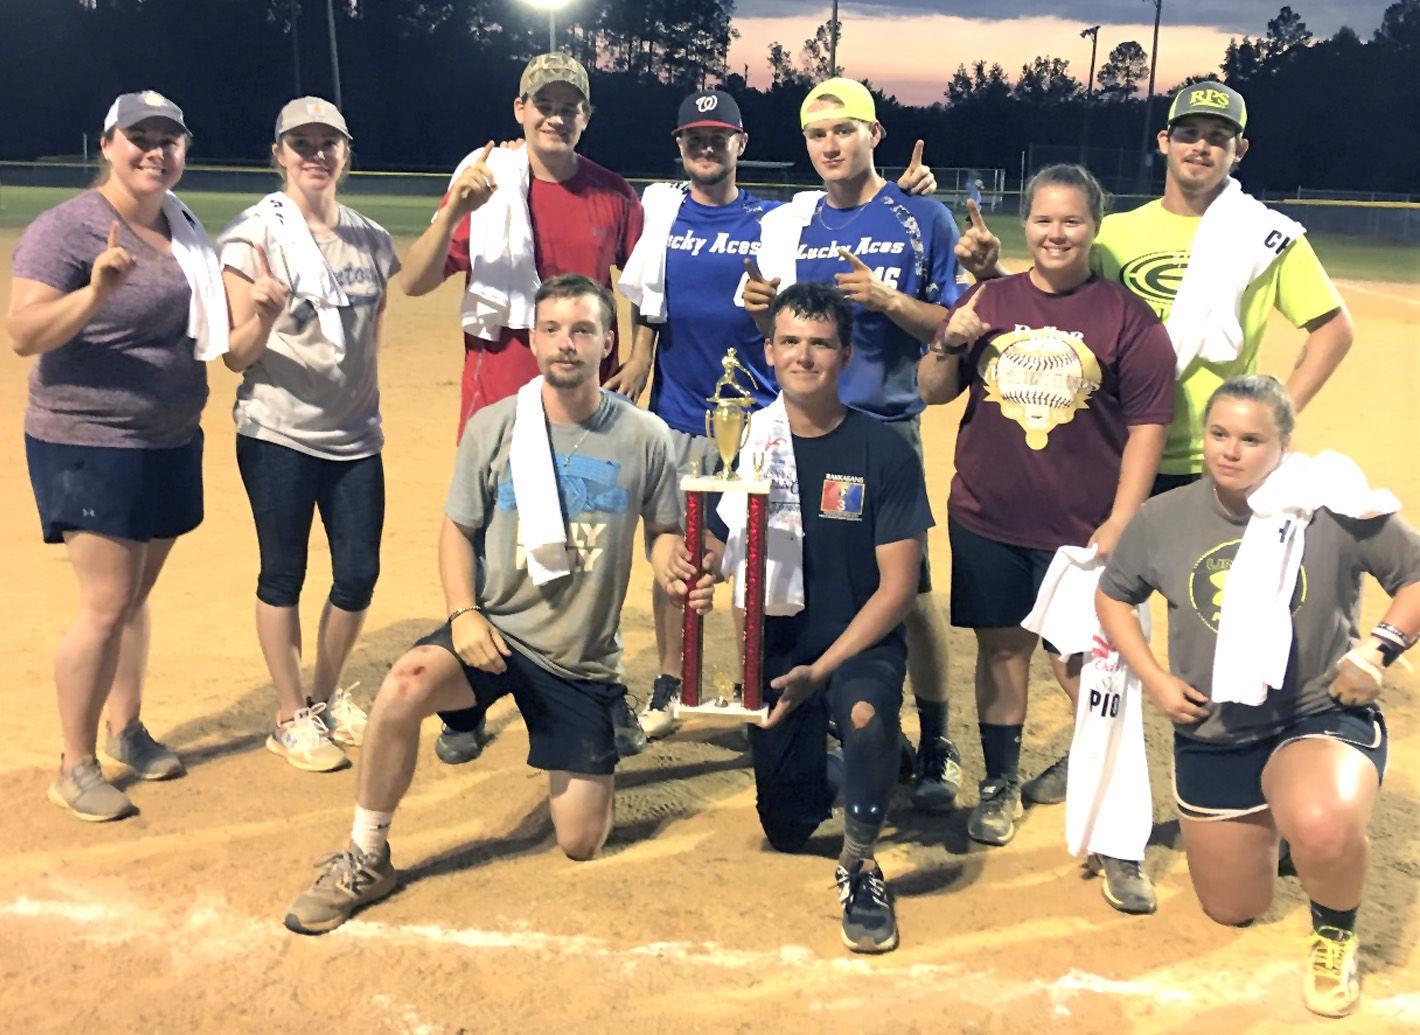 Members of The Who team won the first-place trophy and T-shirts in the first-ever Christmas at the North Pole Co-ed Softball Tournament Fundraiser at the town’s ball field on Oct. 6. The players are, standing from left, Brielle Busbee, Jenna Shealy, Greg Jeffcoat, Sam Jackson, Nash Thornton, Hayley Earwood and Brandon Earwood and, kneeling, Austin Fogle, D.J. Bullock and Amber Earwood.